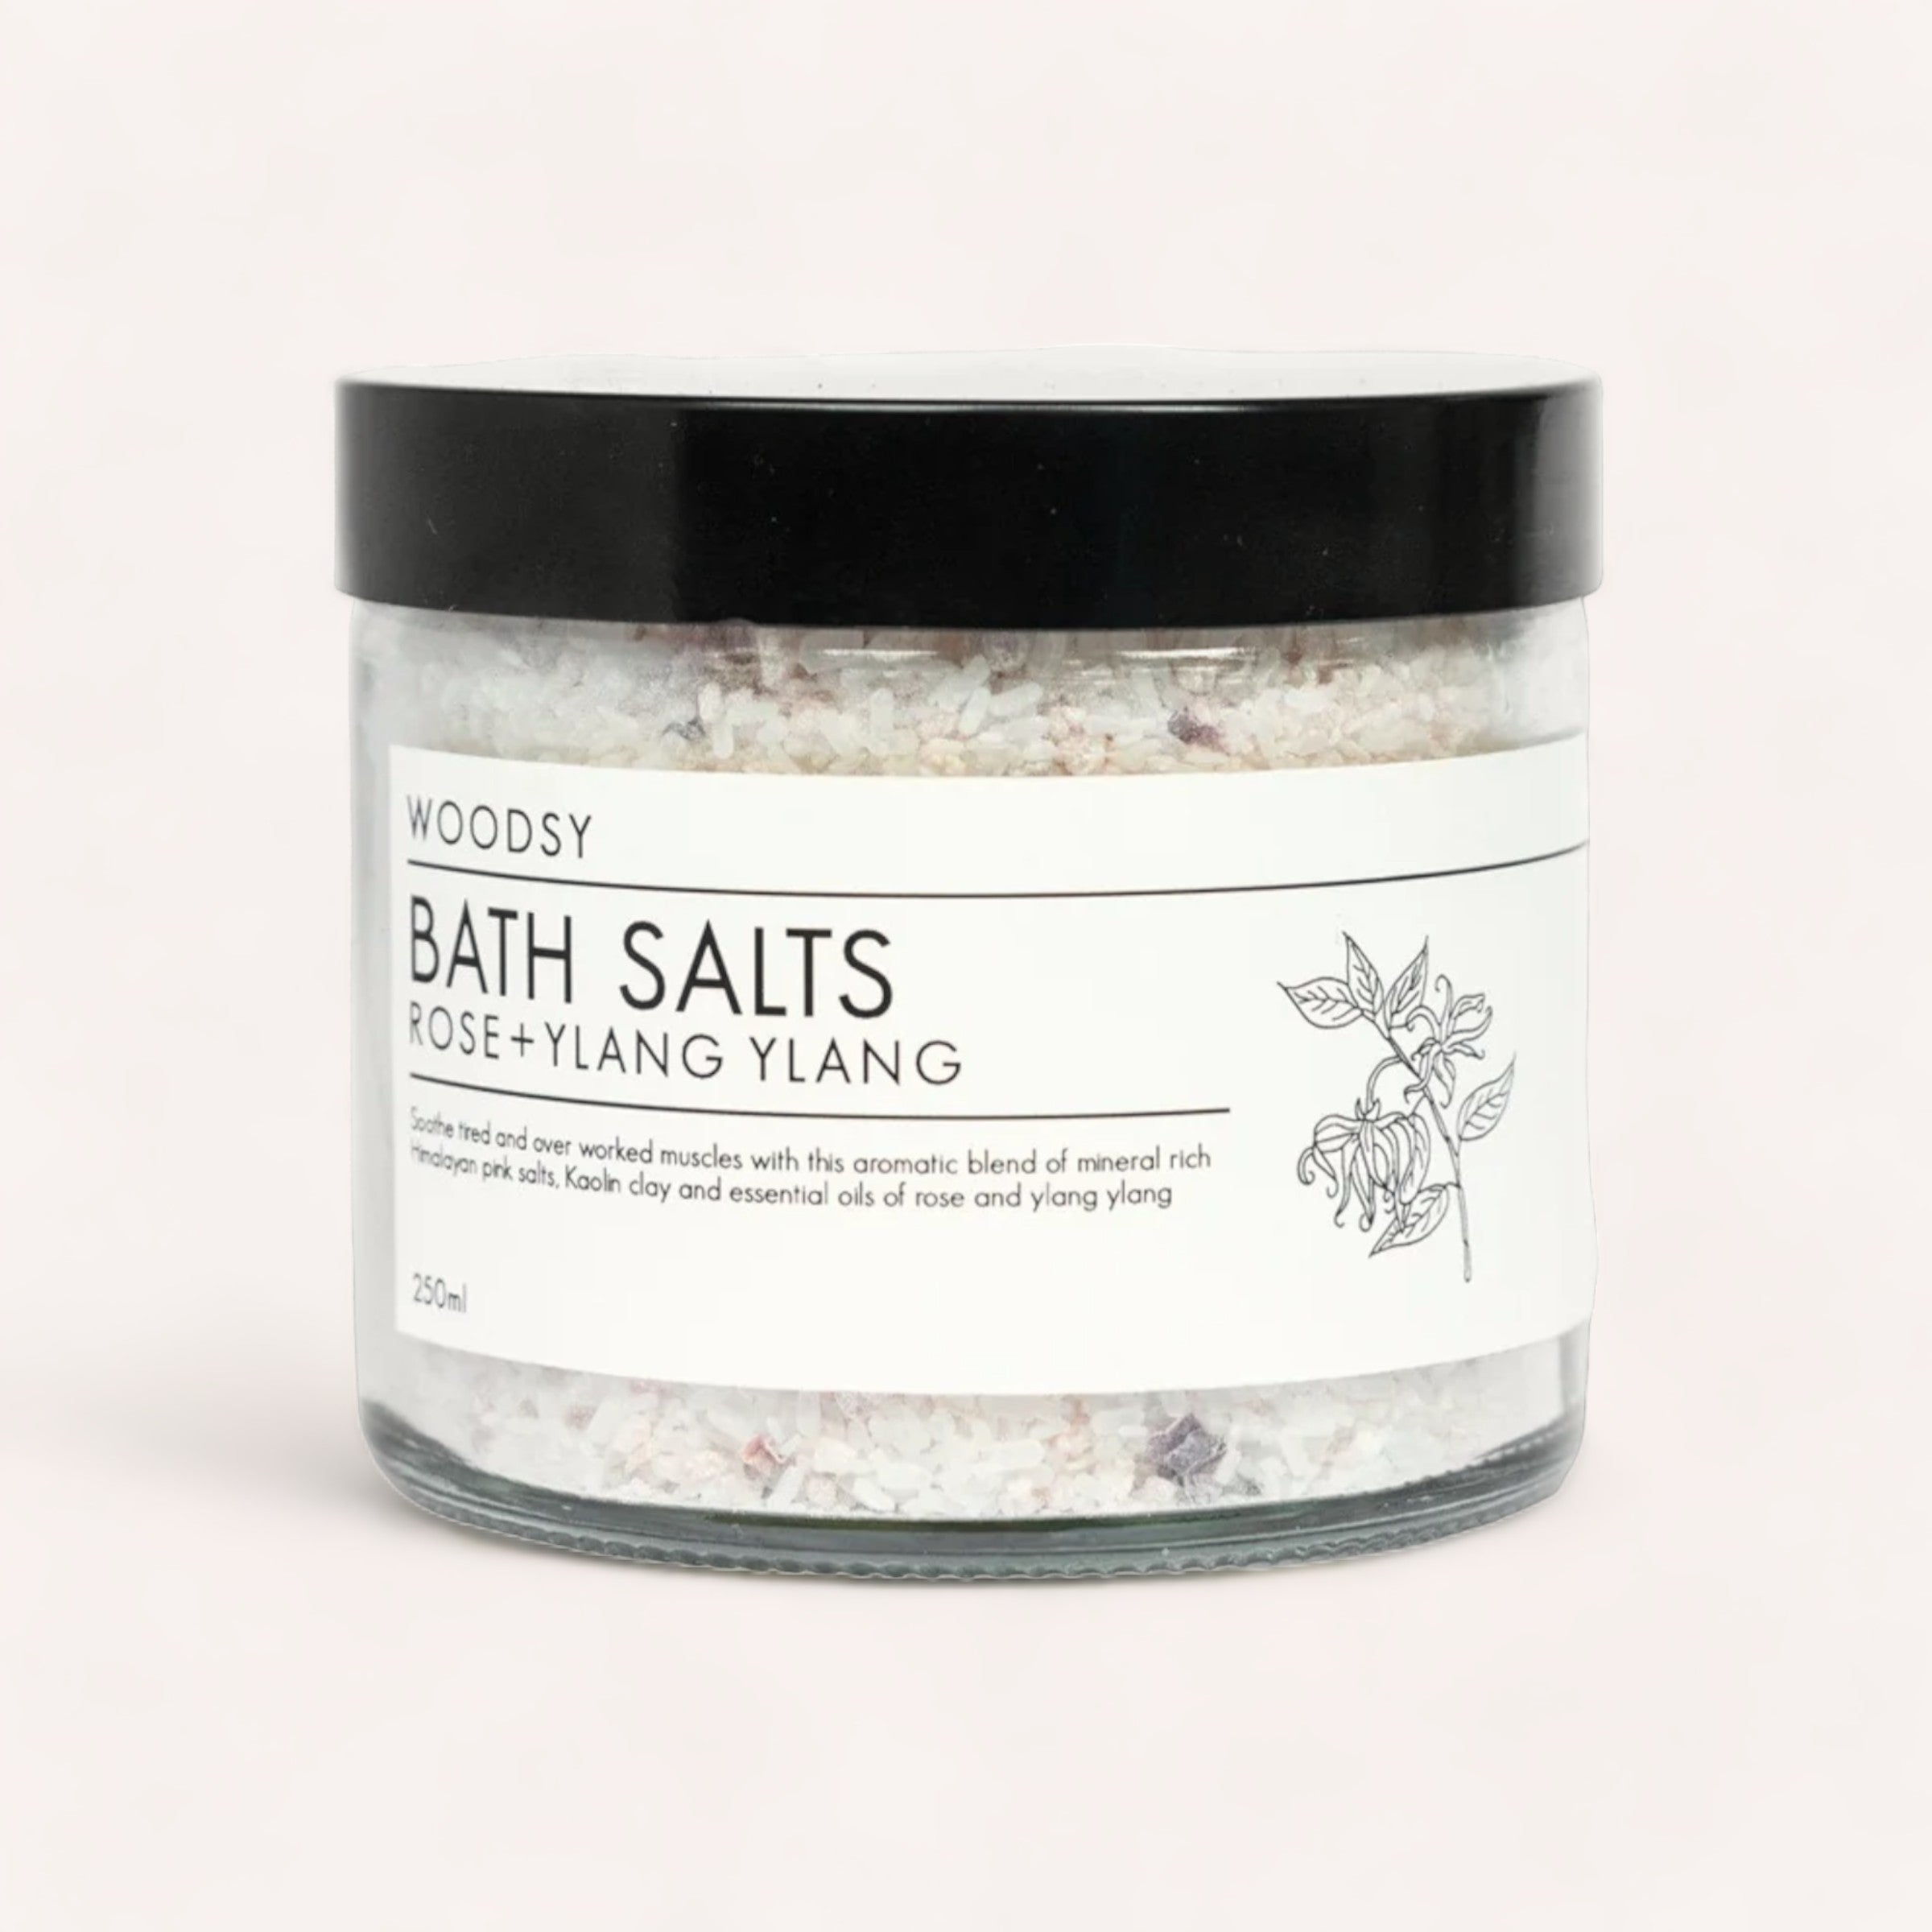 Clear glass jar of Bath Salts - Rose & Ylang Ylang labeled "Woodsy Botanics" with organic essential oils in a simple, elegant design.